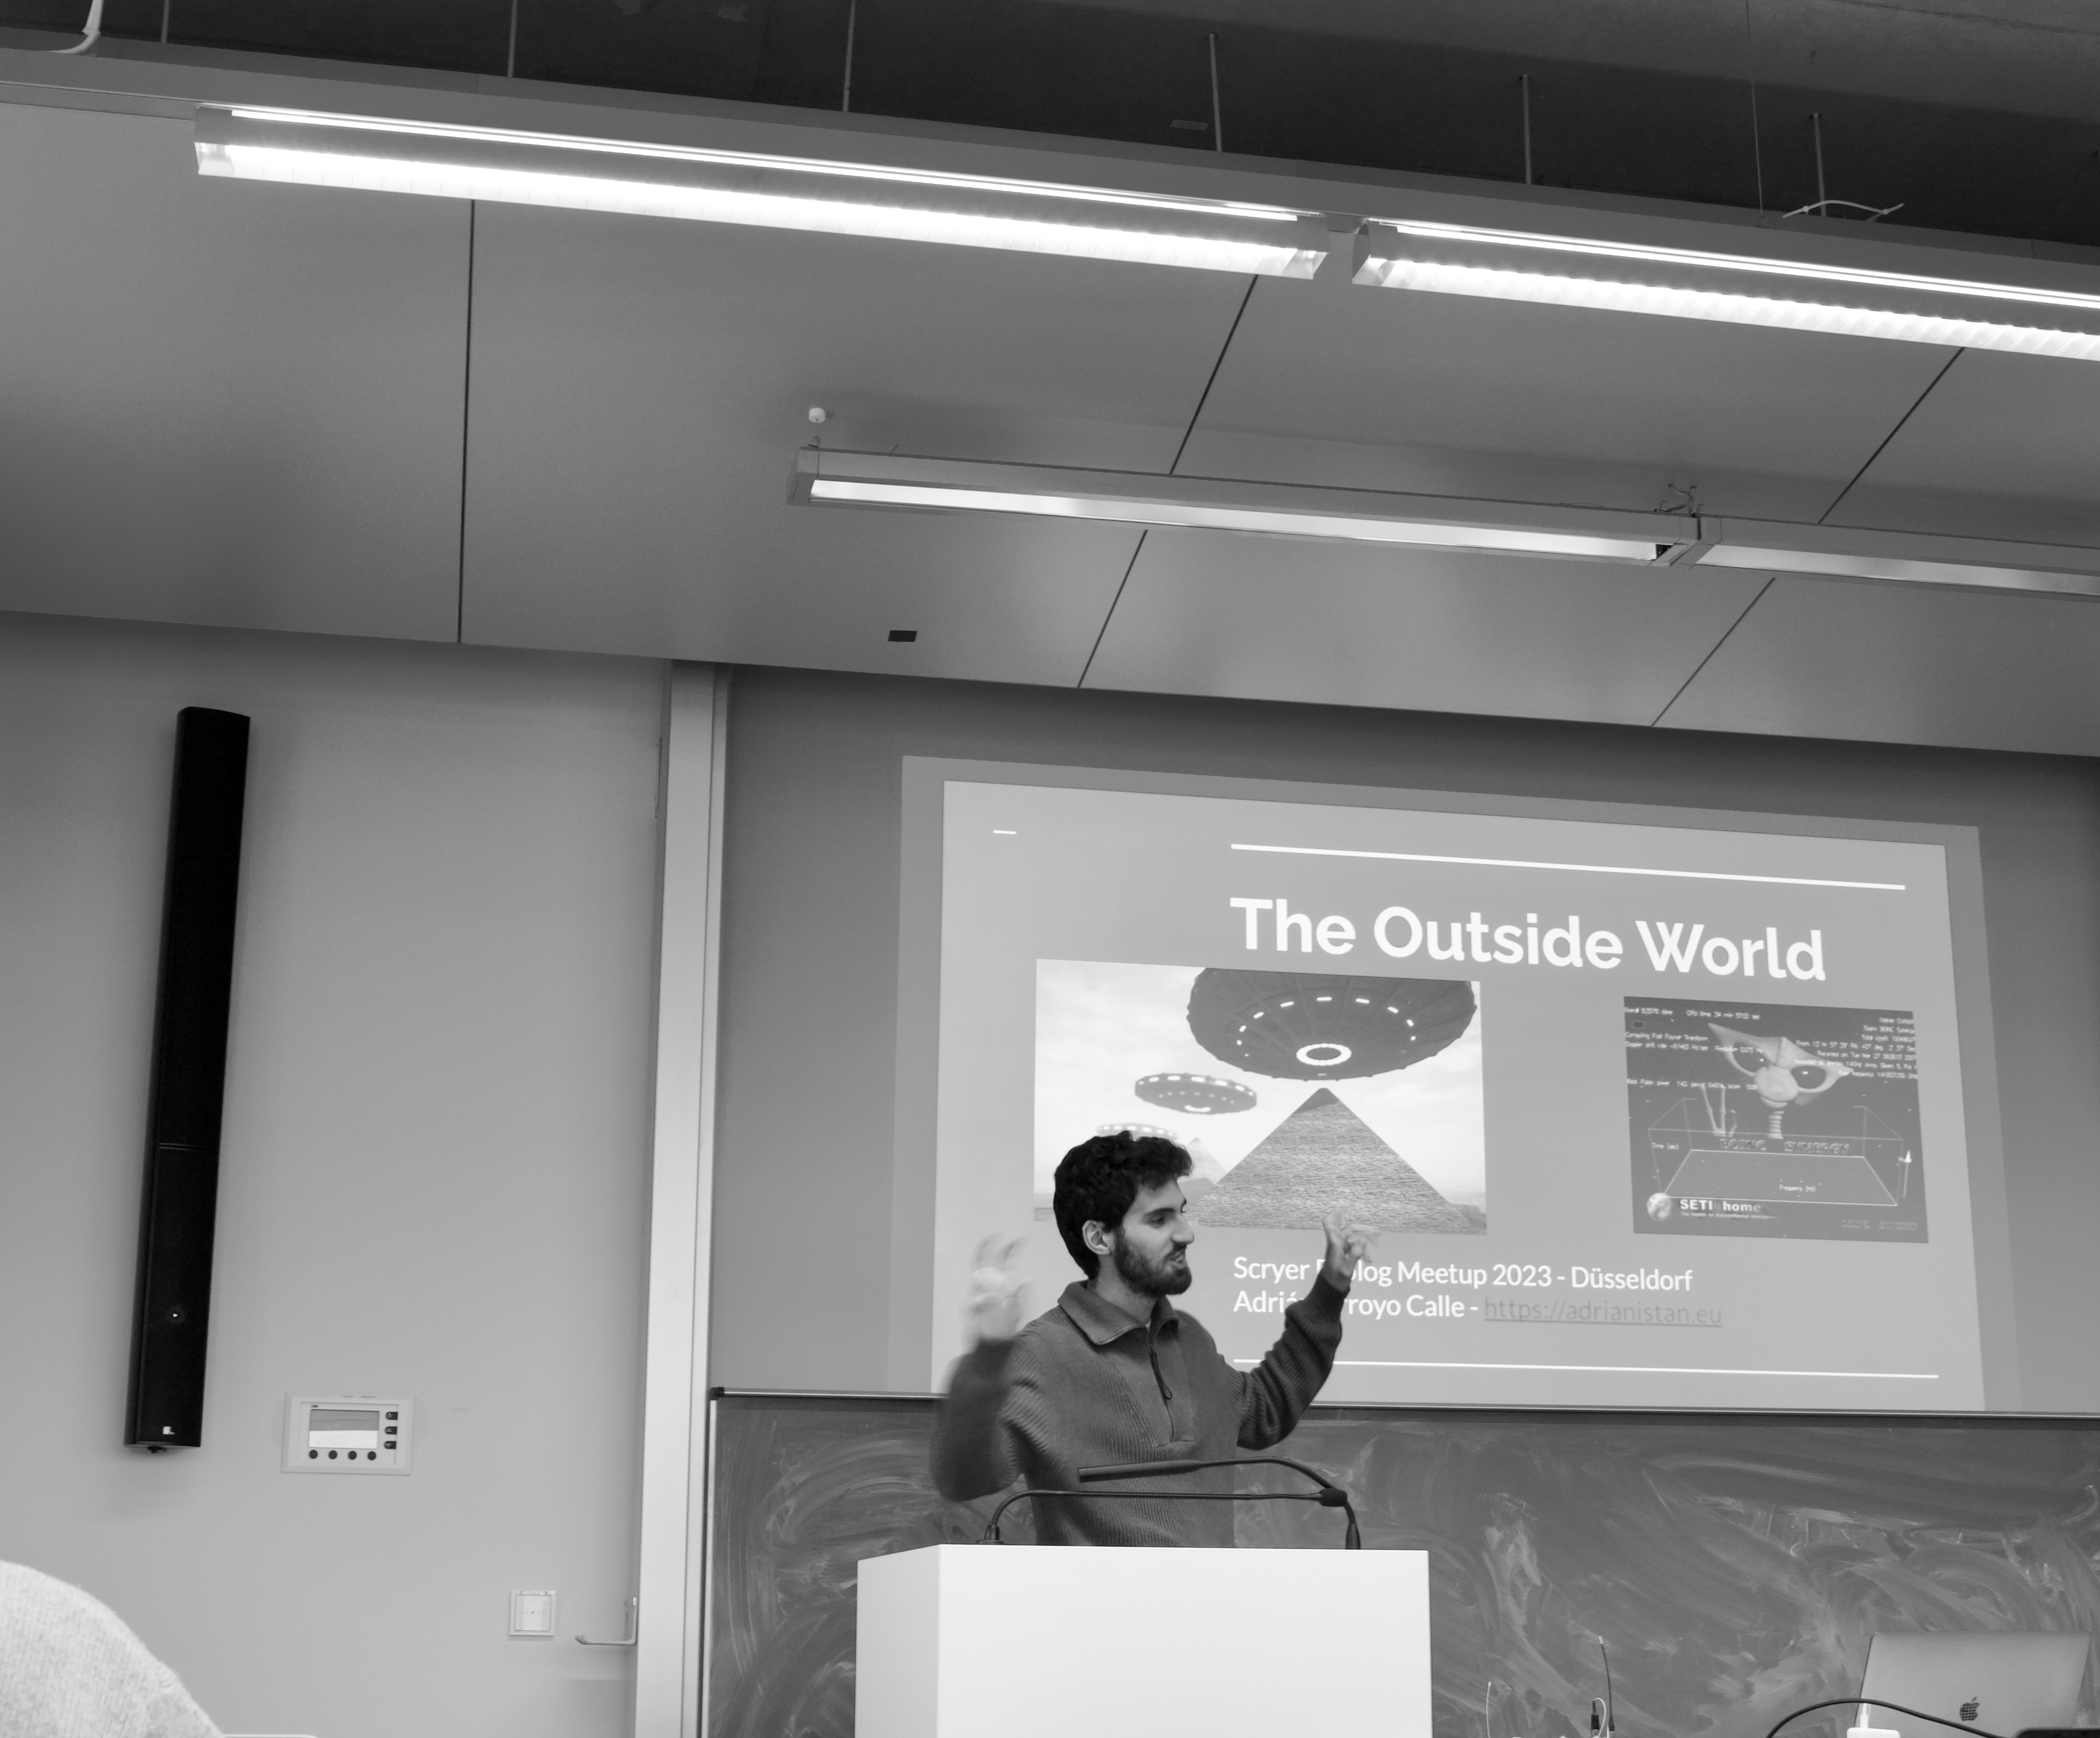 Photo of Adrián Arroyo Calle in Düsseldorf during the Scryer Prolog Meetup 2023